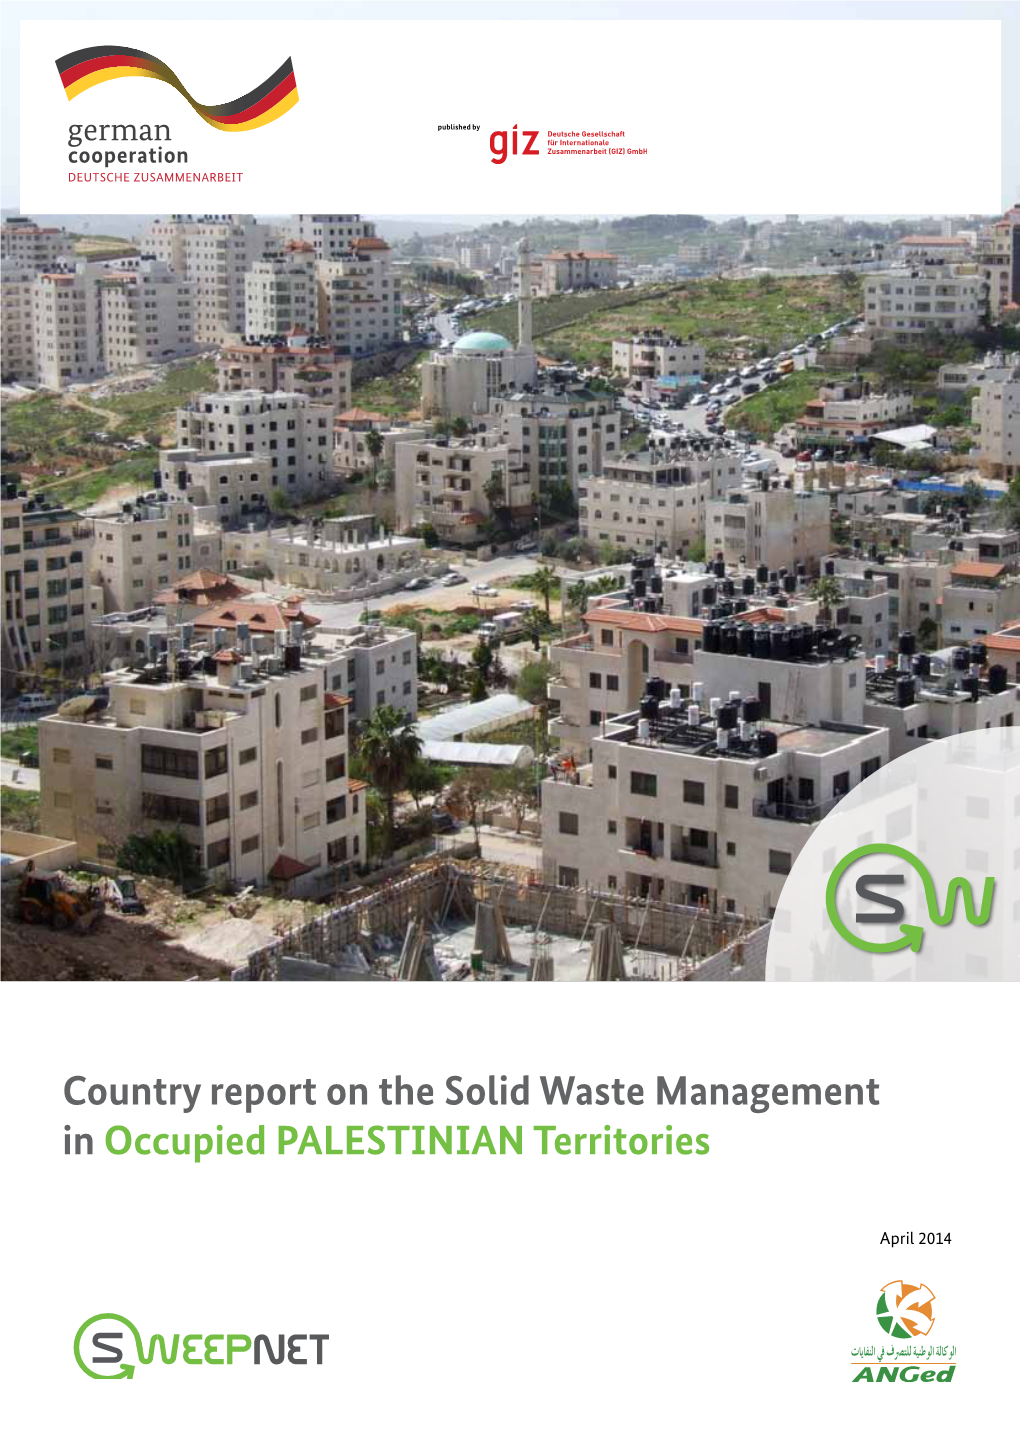 Country Report on the Solid Waste Management in Occupied PALESTINIAN Territories